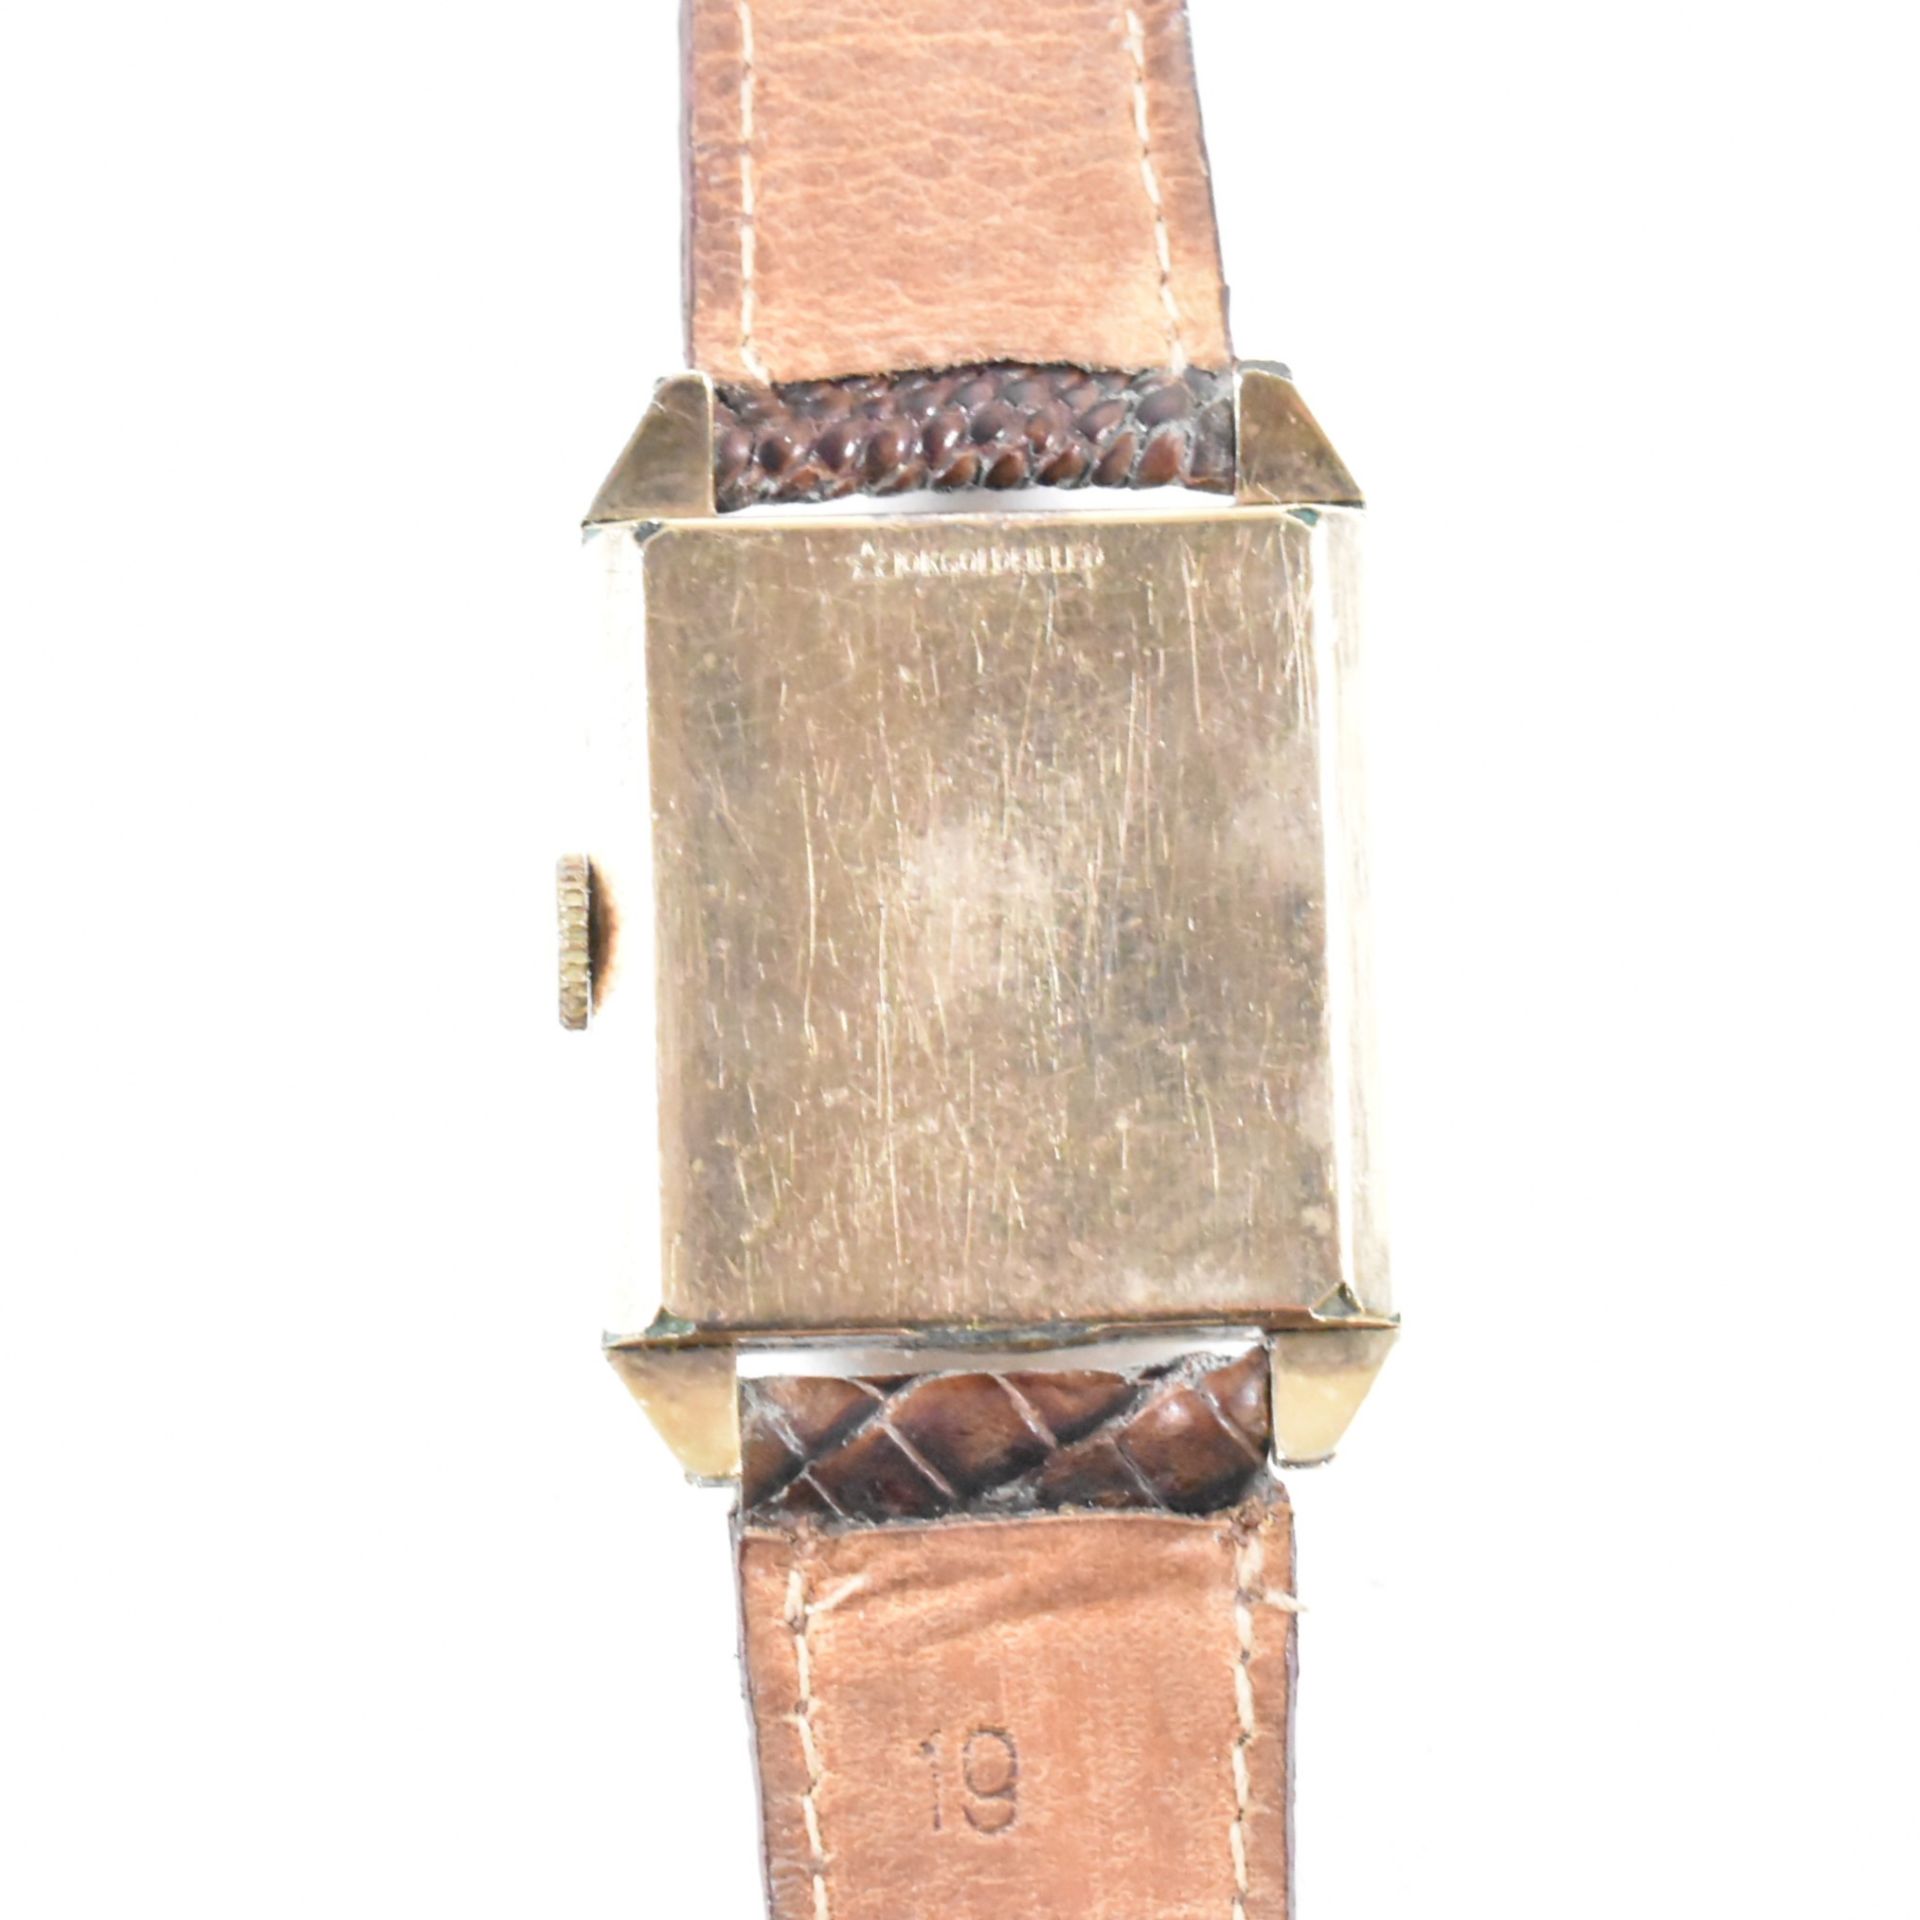 LONGINES 10CT GOLD FILLED WRISTWATCH ON LEATHER STRAP - Image 2 of 6